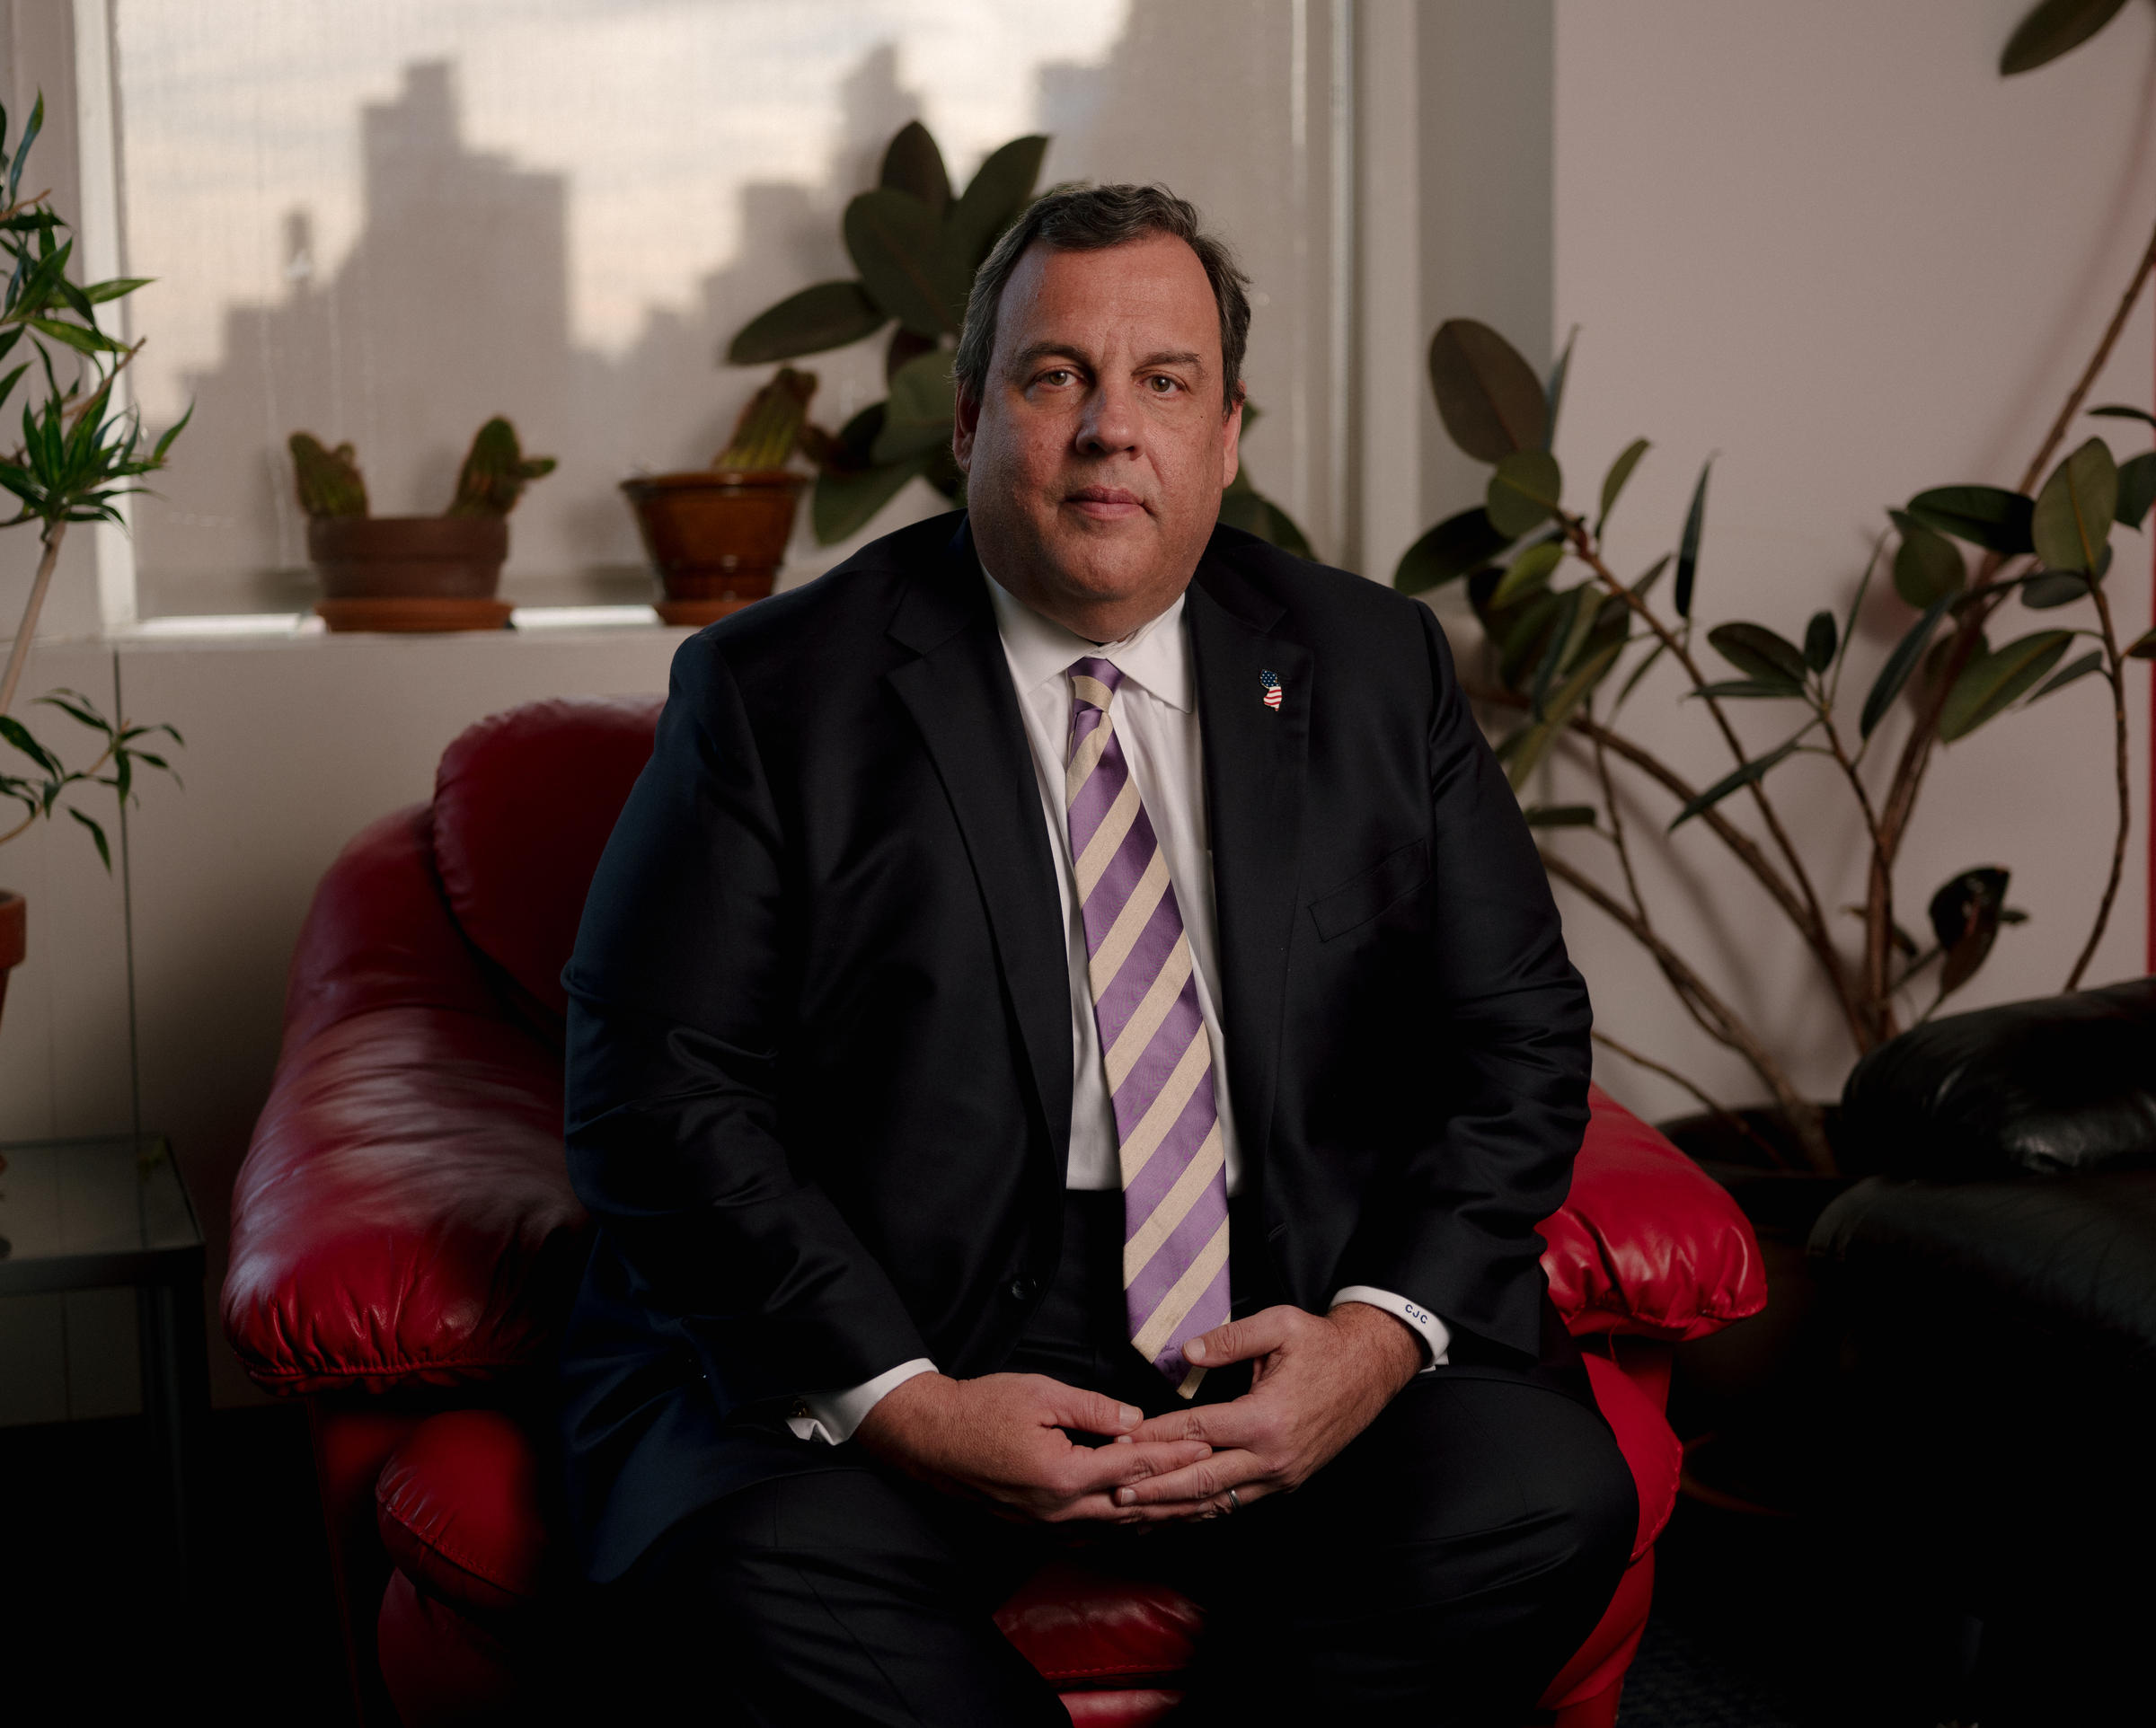 Chris Christie: There Is No One With More Influence Over Trump Than Jared Kushner | WSIU